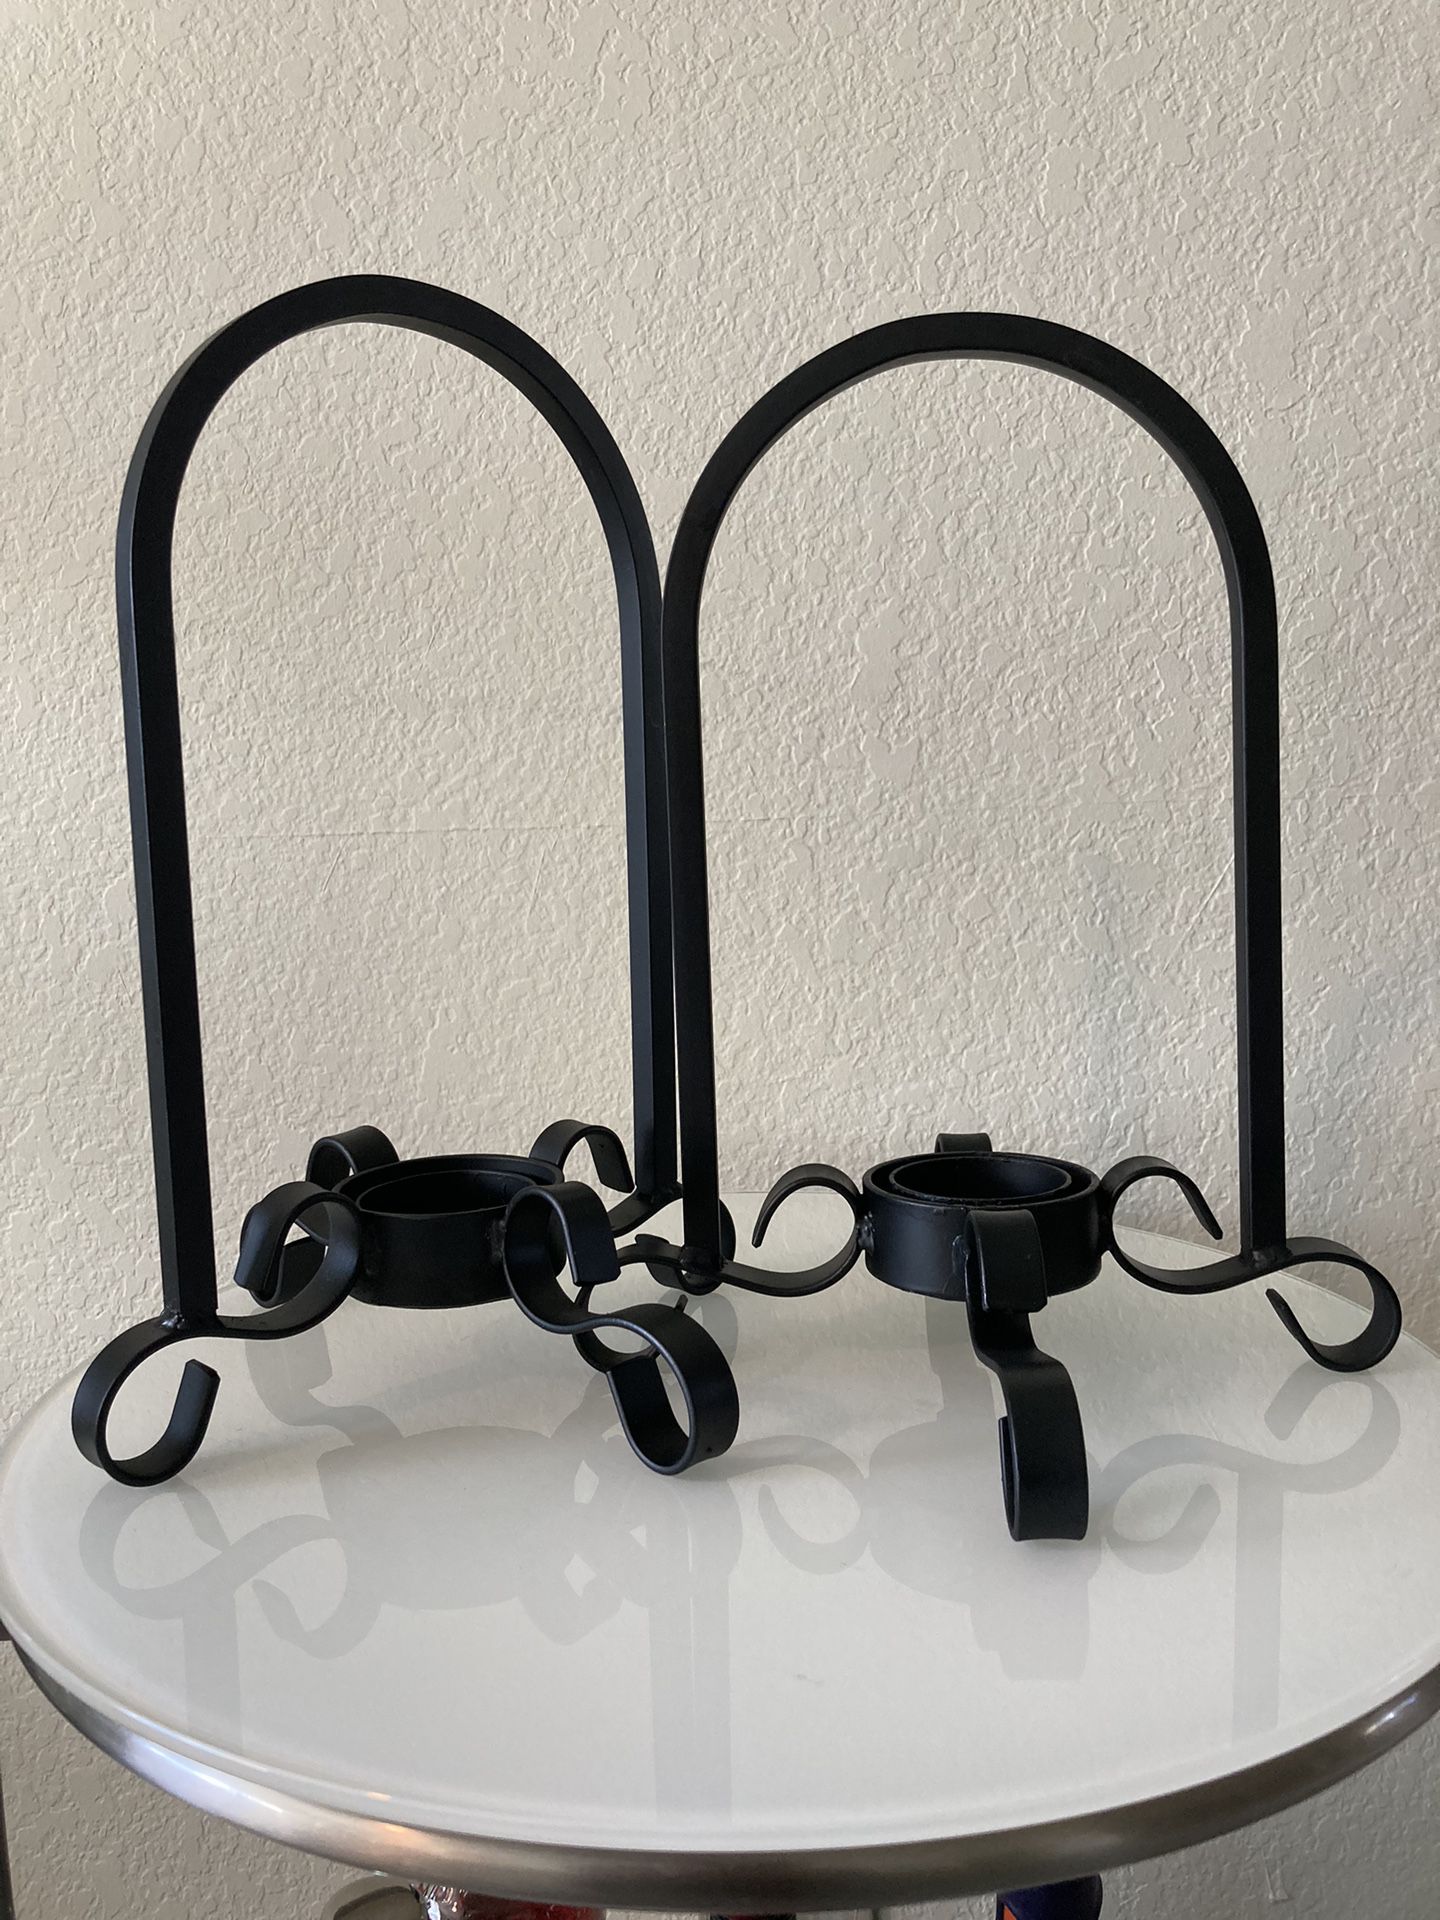 Two Wrought Iron Pillar Candle Holders